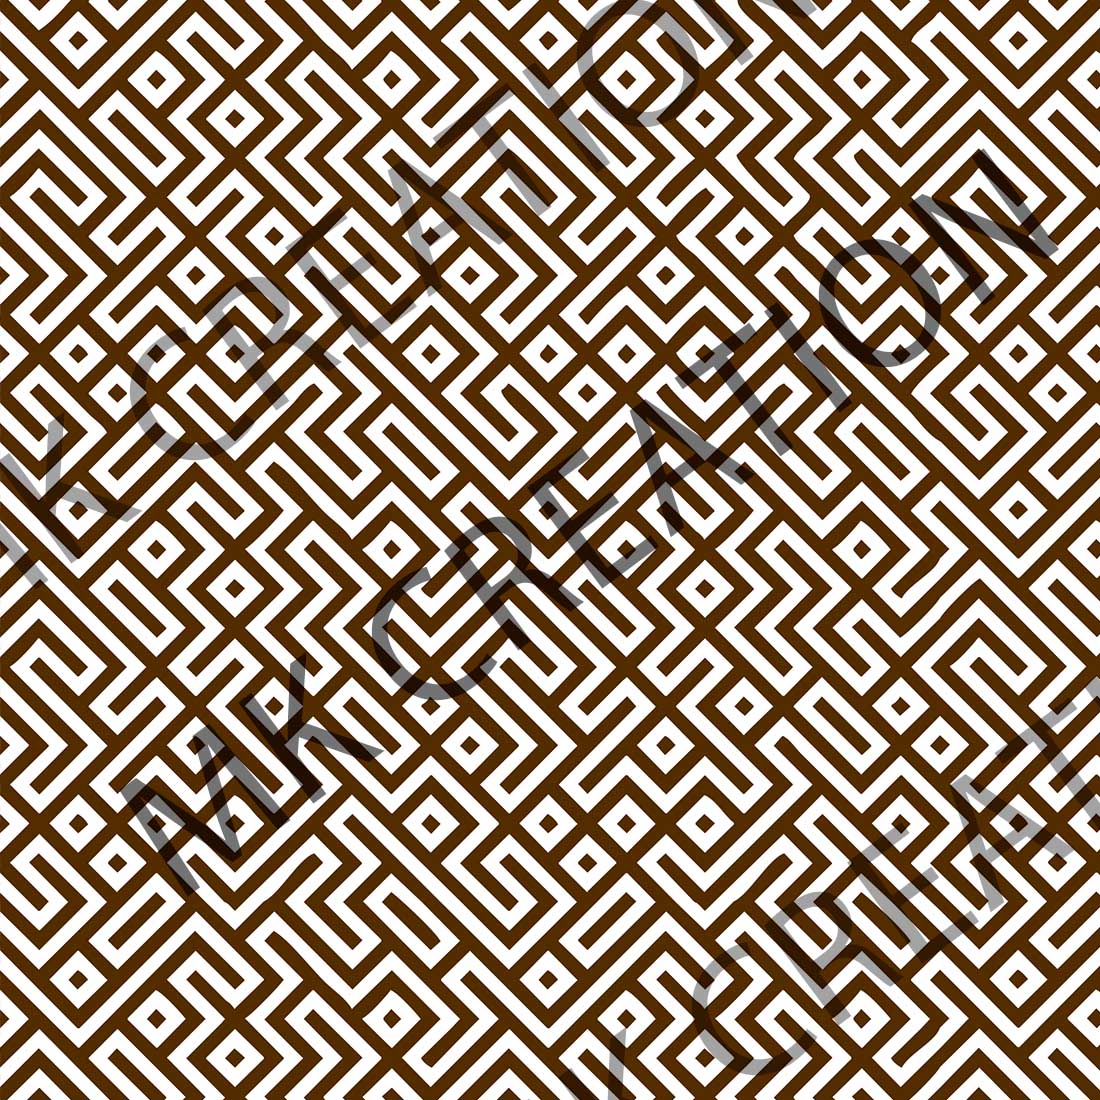 Brown and white background with a maze pattern.